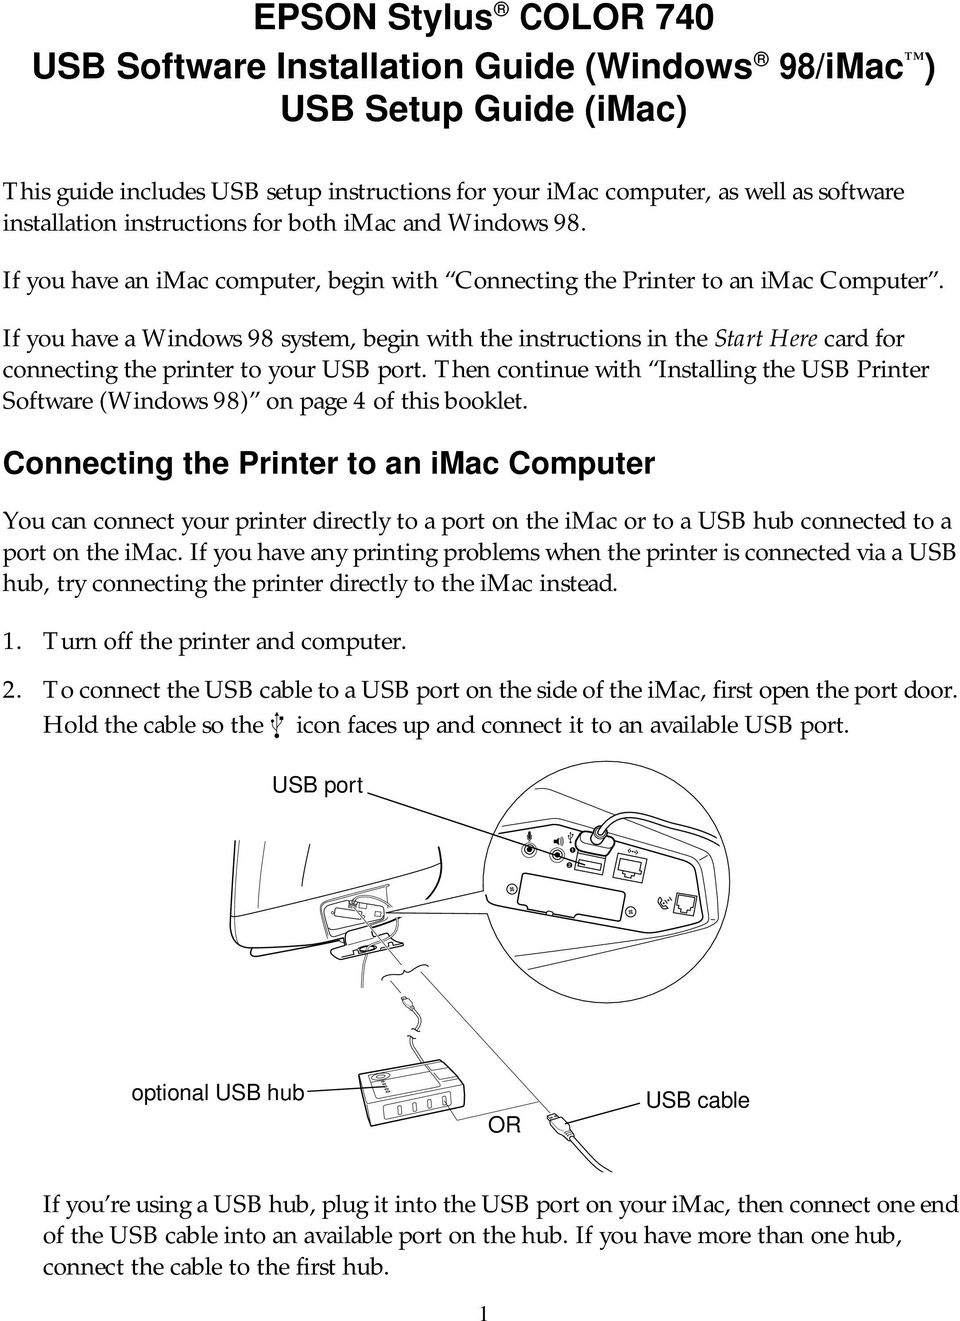 If you have a Windows 98 system, begin with the instructions in the Start Here card for connecting the printer to your USB port.